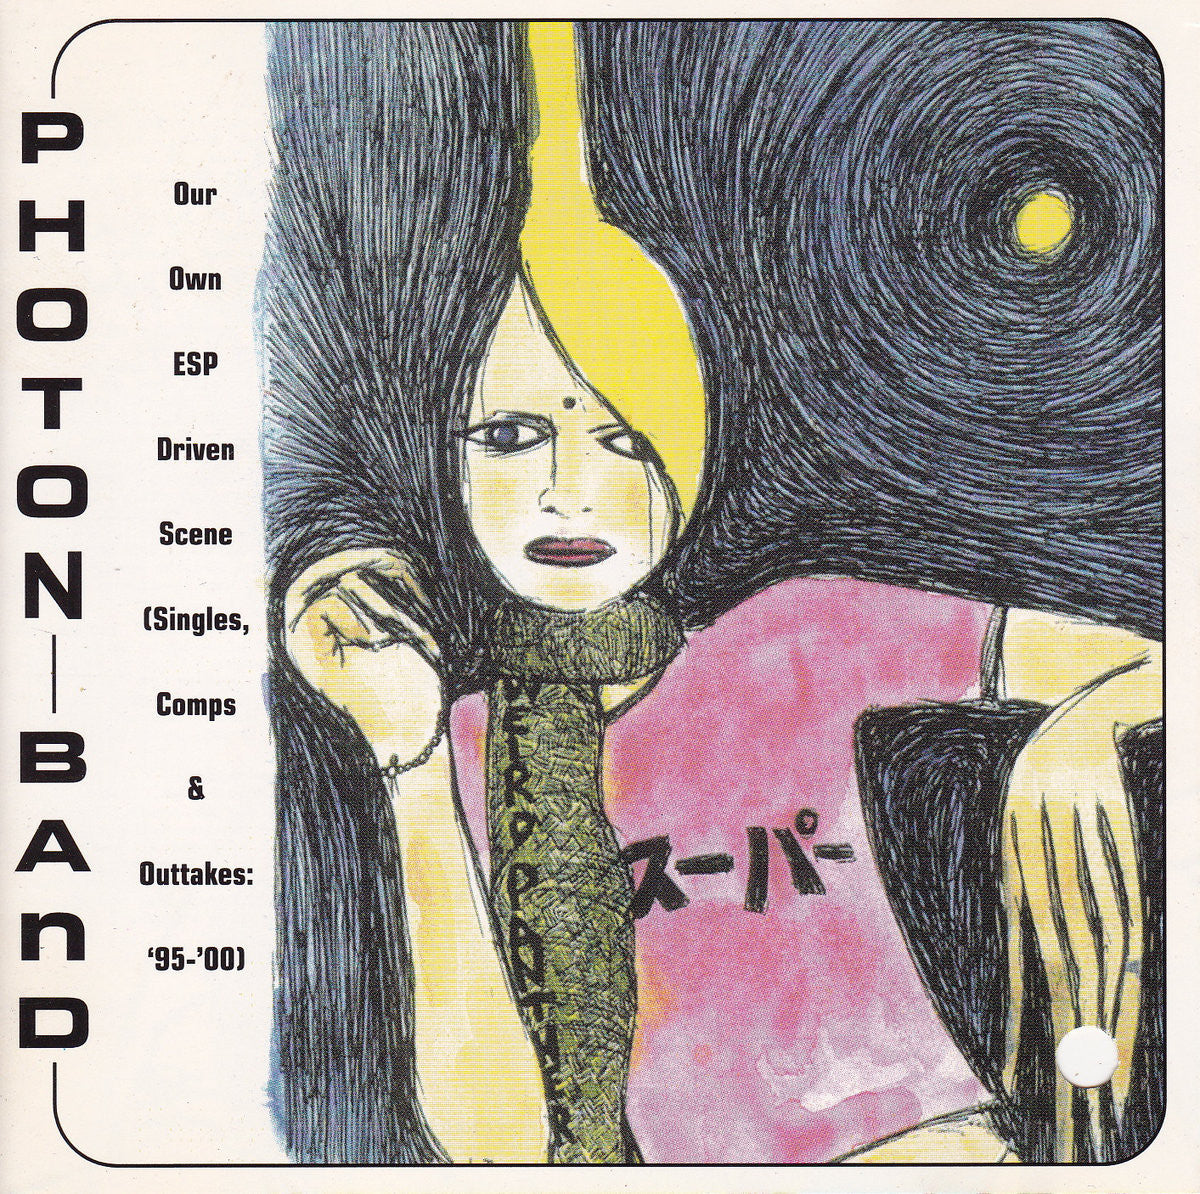 Photon Band - Our Own ESP Driven Scene: Singles, Comps. & Outtakes 1995-2000